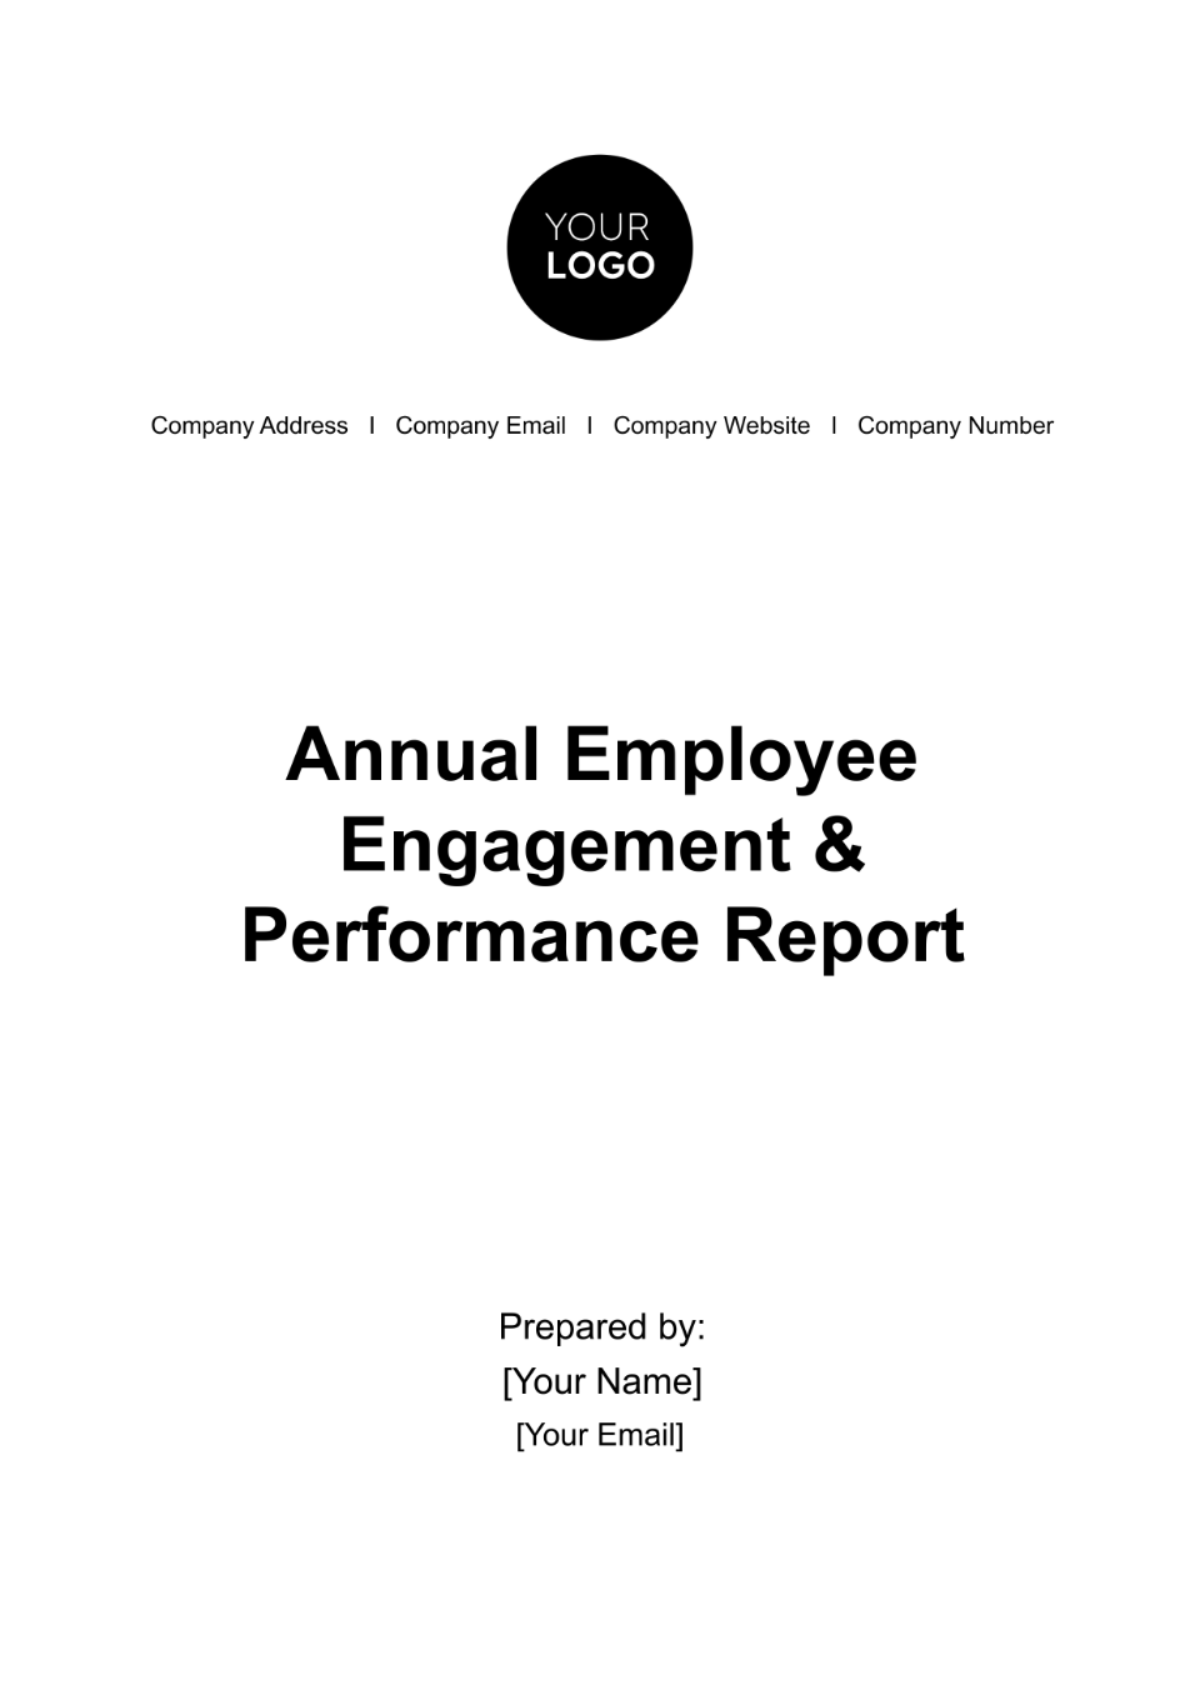 Annual Employee Engagement & Performance Report HR Template